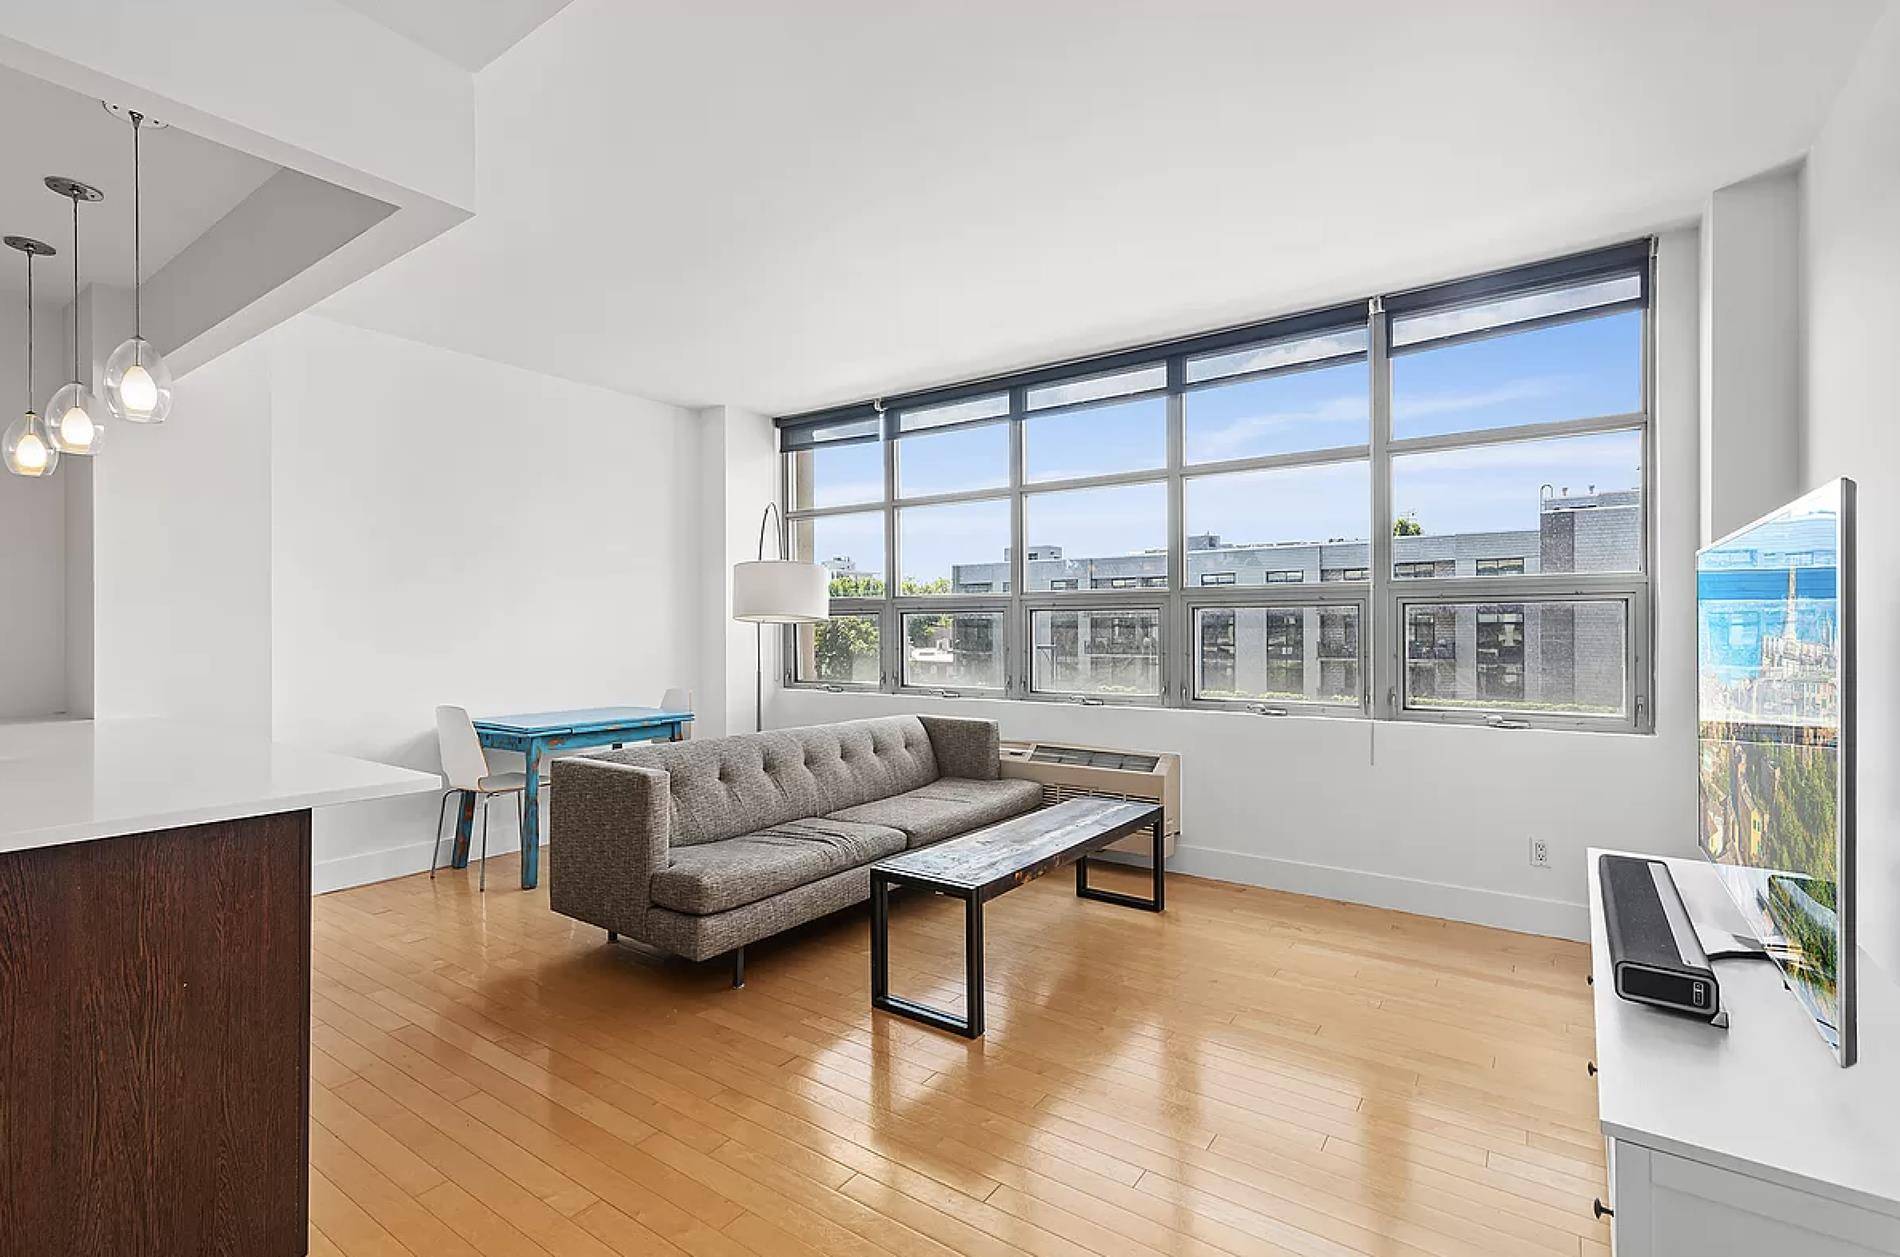 Beautiful 700 Sq Ft one bedroom with southern views of the Manhattan skyline, natural sunlight from a wall of oversized windows, maple hardwood flooring with a more than generous sized ...